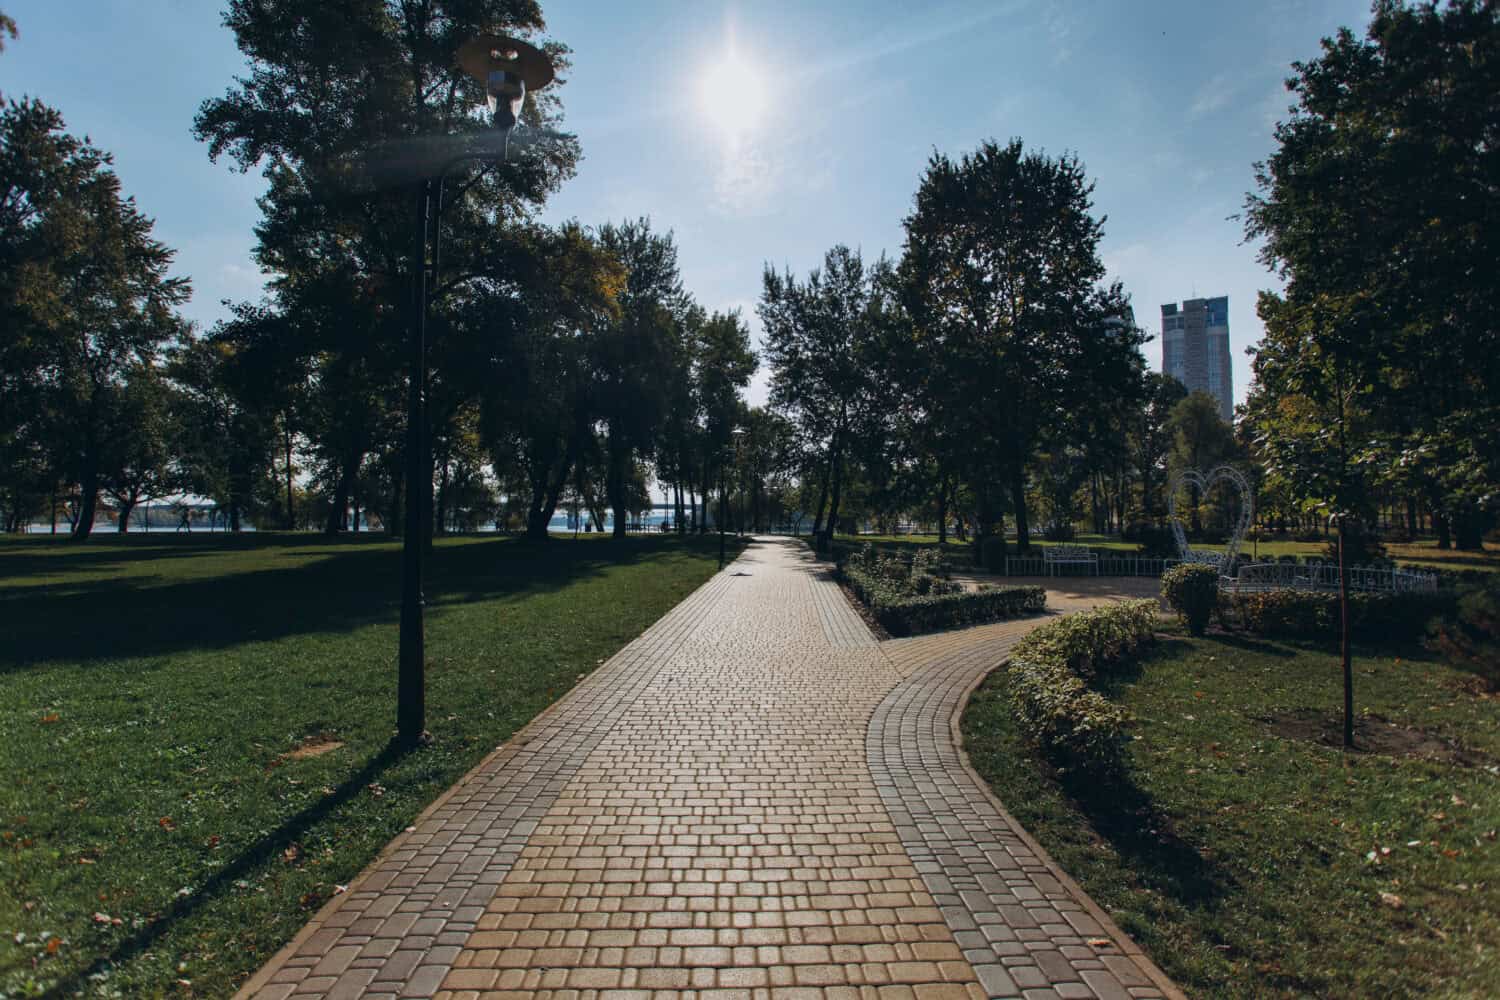 walking path in a city park at sunset